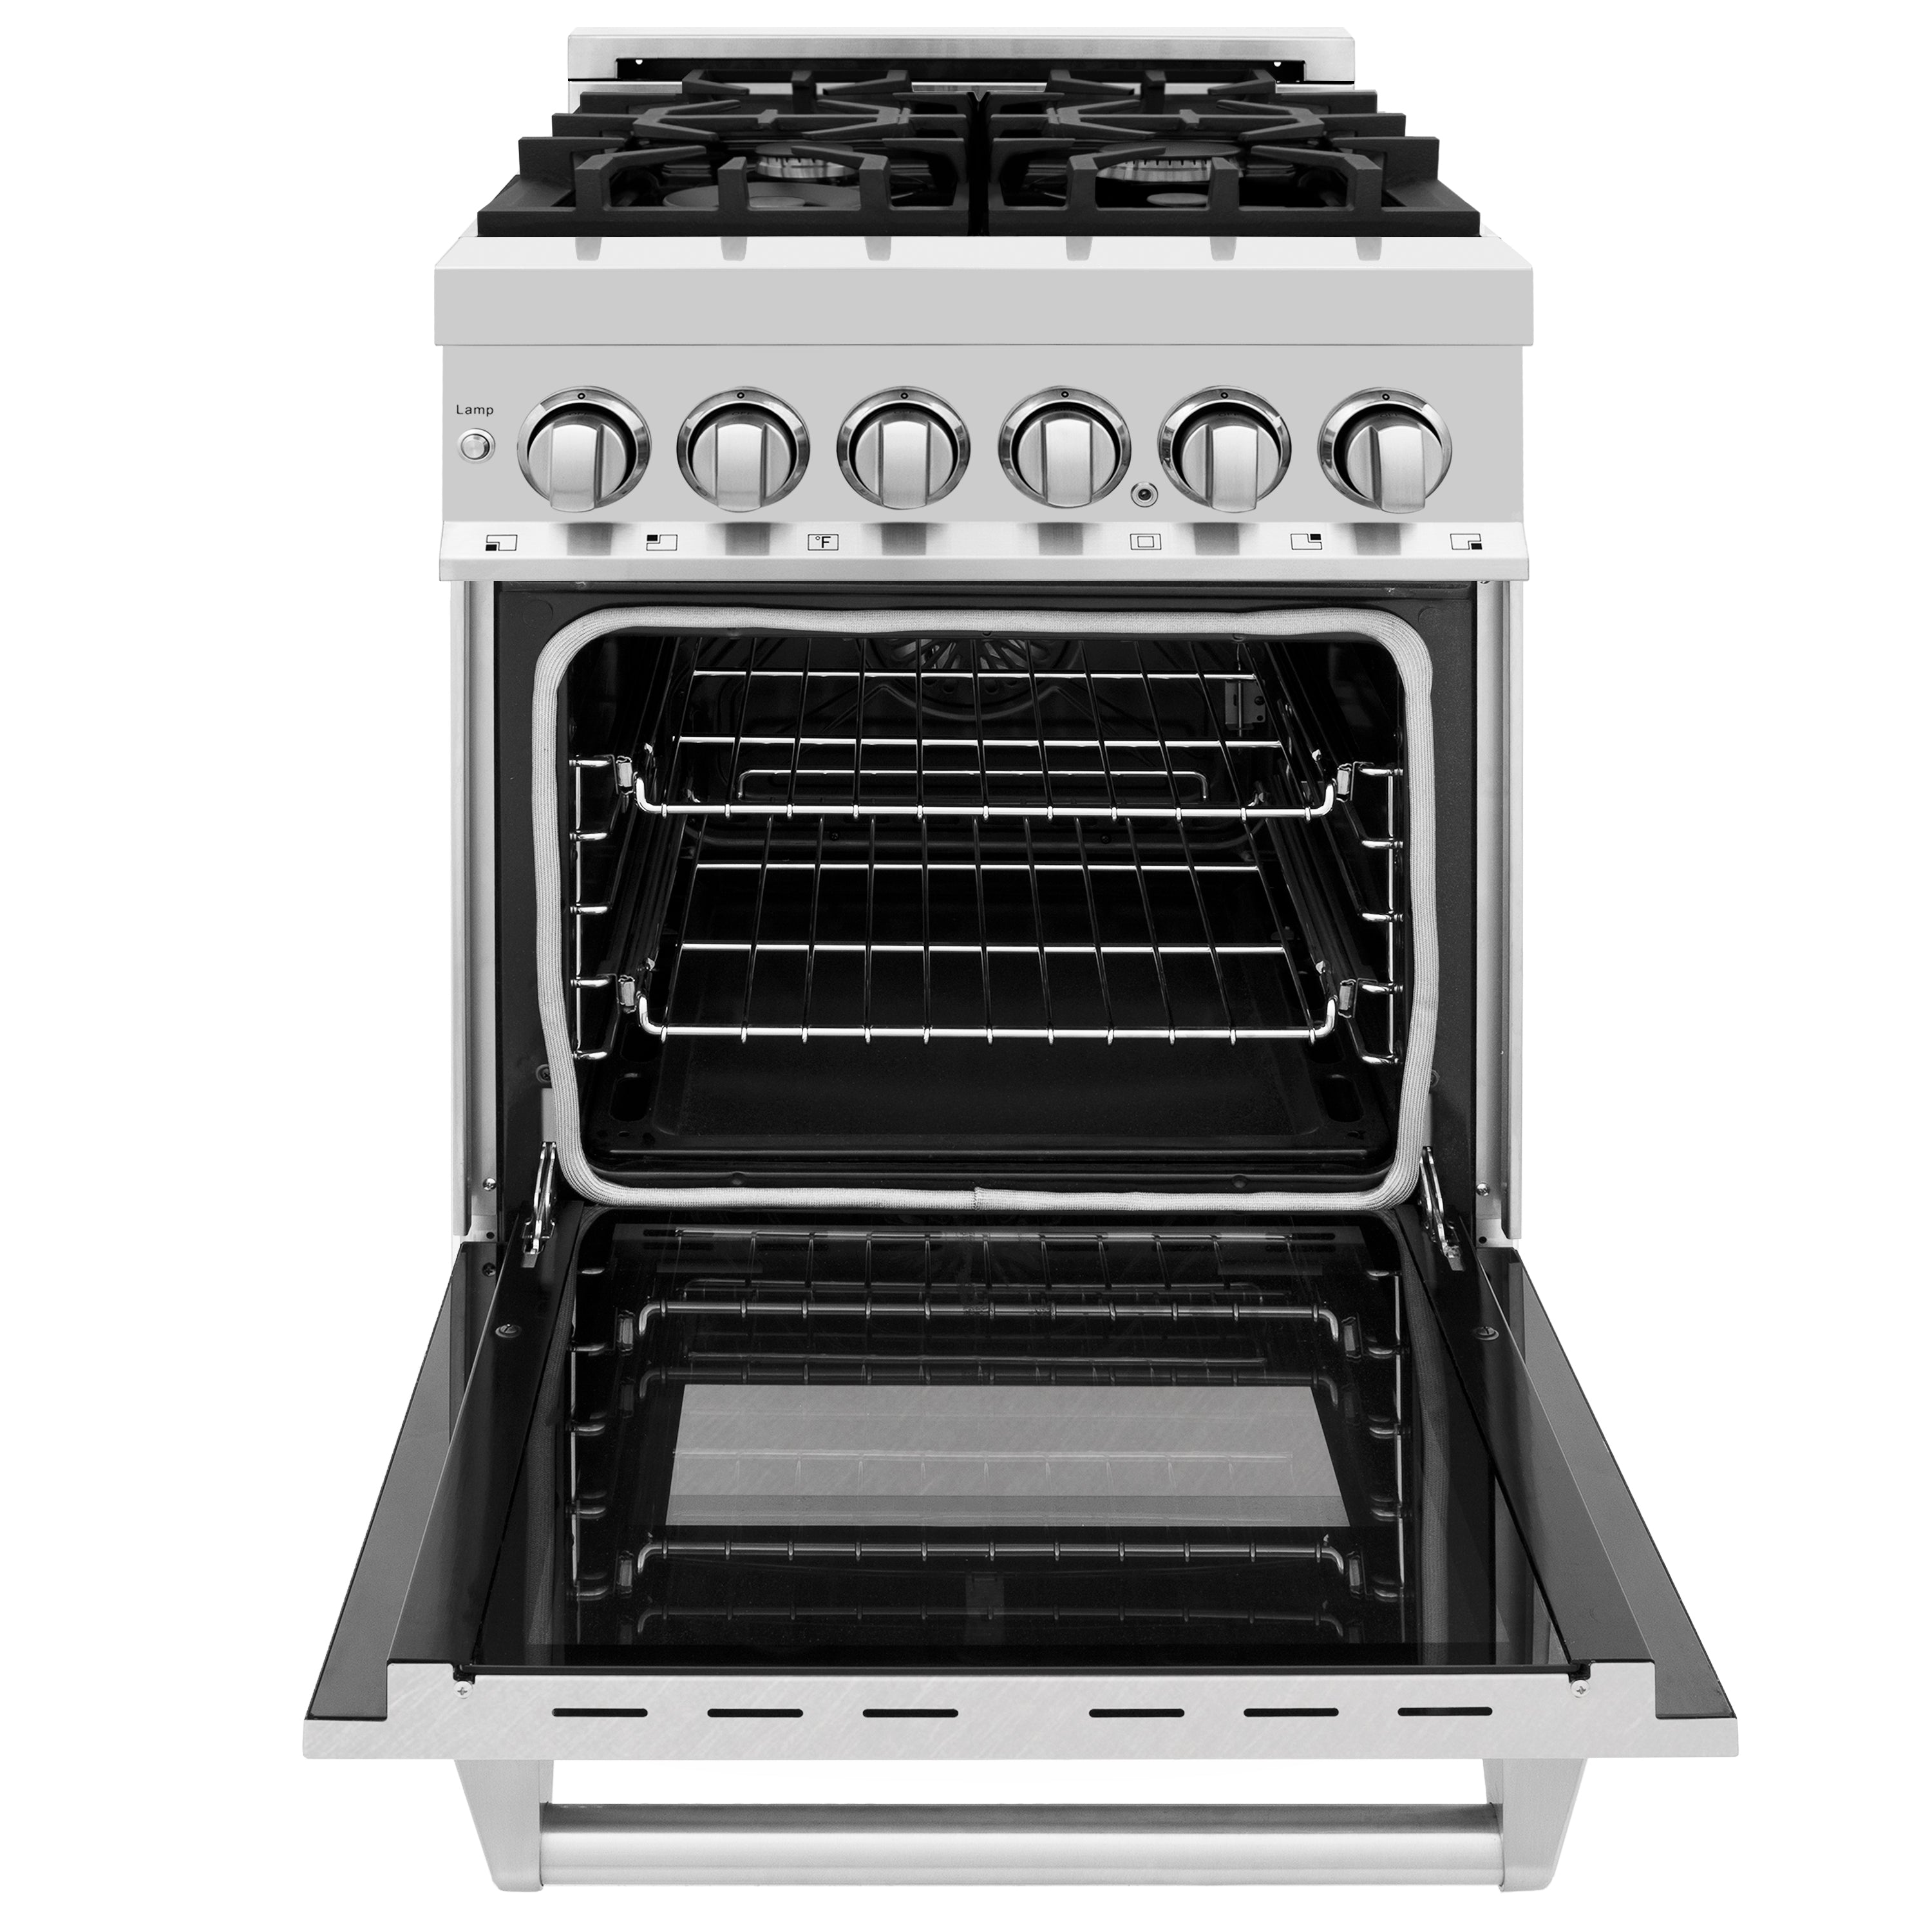 ZLINE 24" 2.8 cu. ft. Dual Fuel Range with Gas Stove and Electric Oven in Fingerprint Resistant Stainless Steel (RA-SN-24)